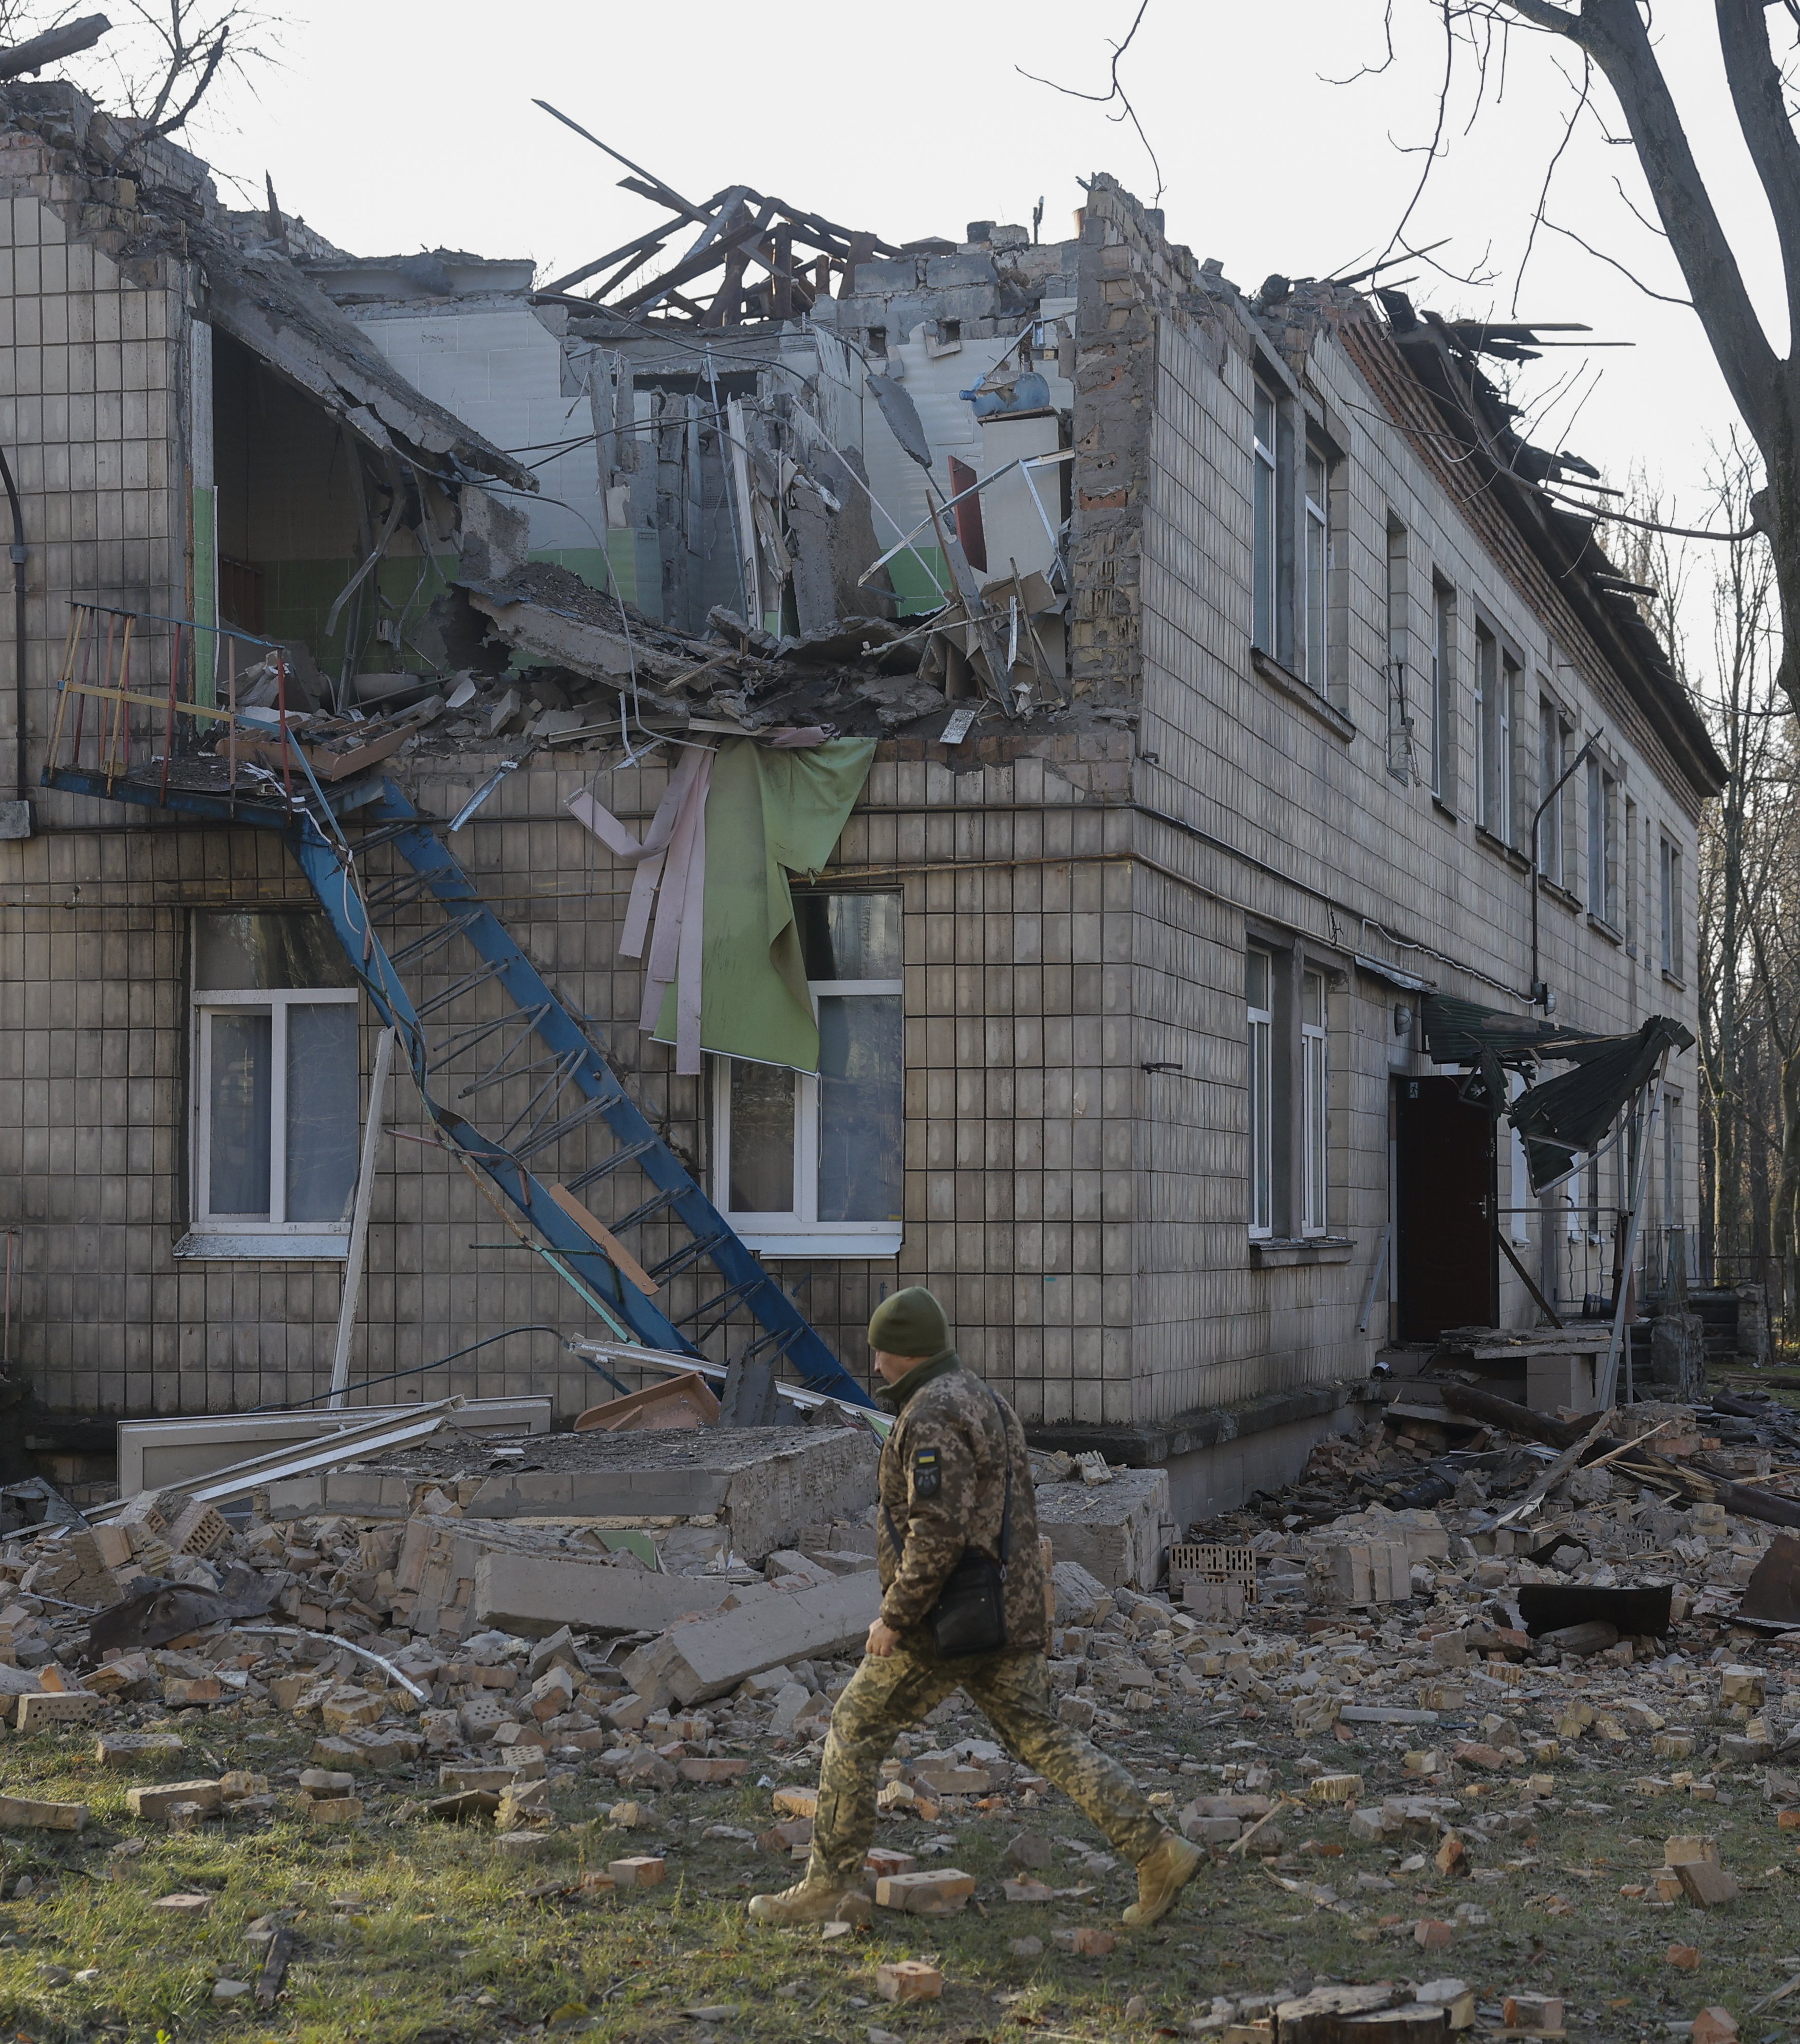 A police officer inspects a nursery school damaged during drone strikes in Kyiv on Saturday. Photo: EPA-EFE